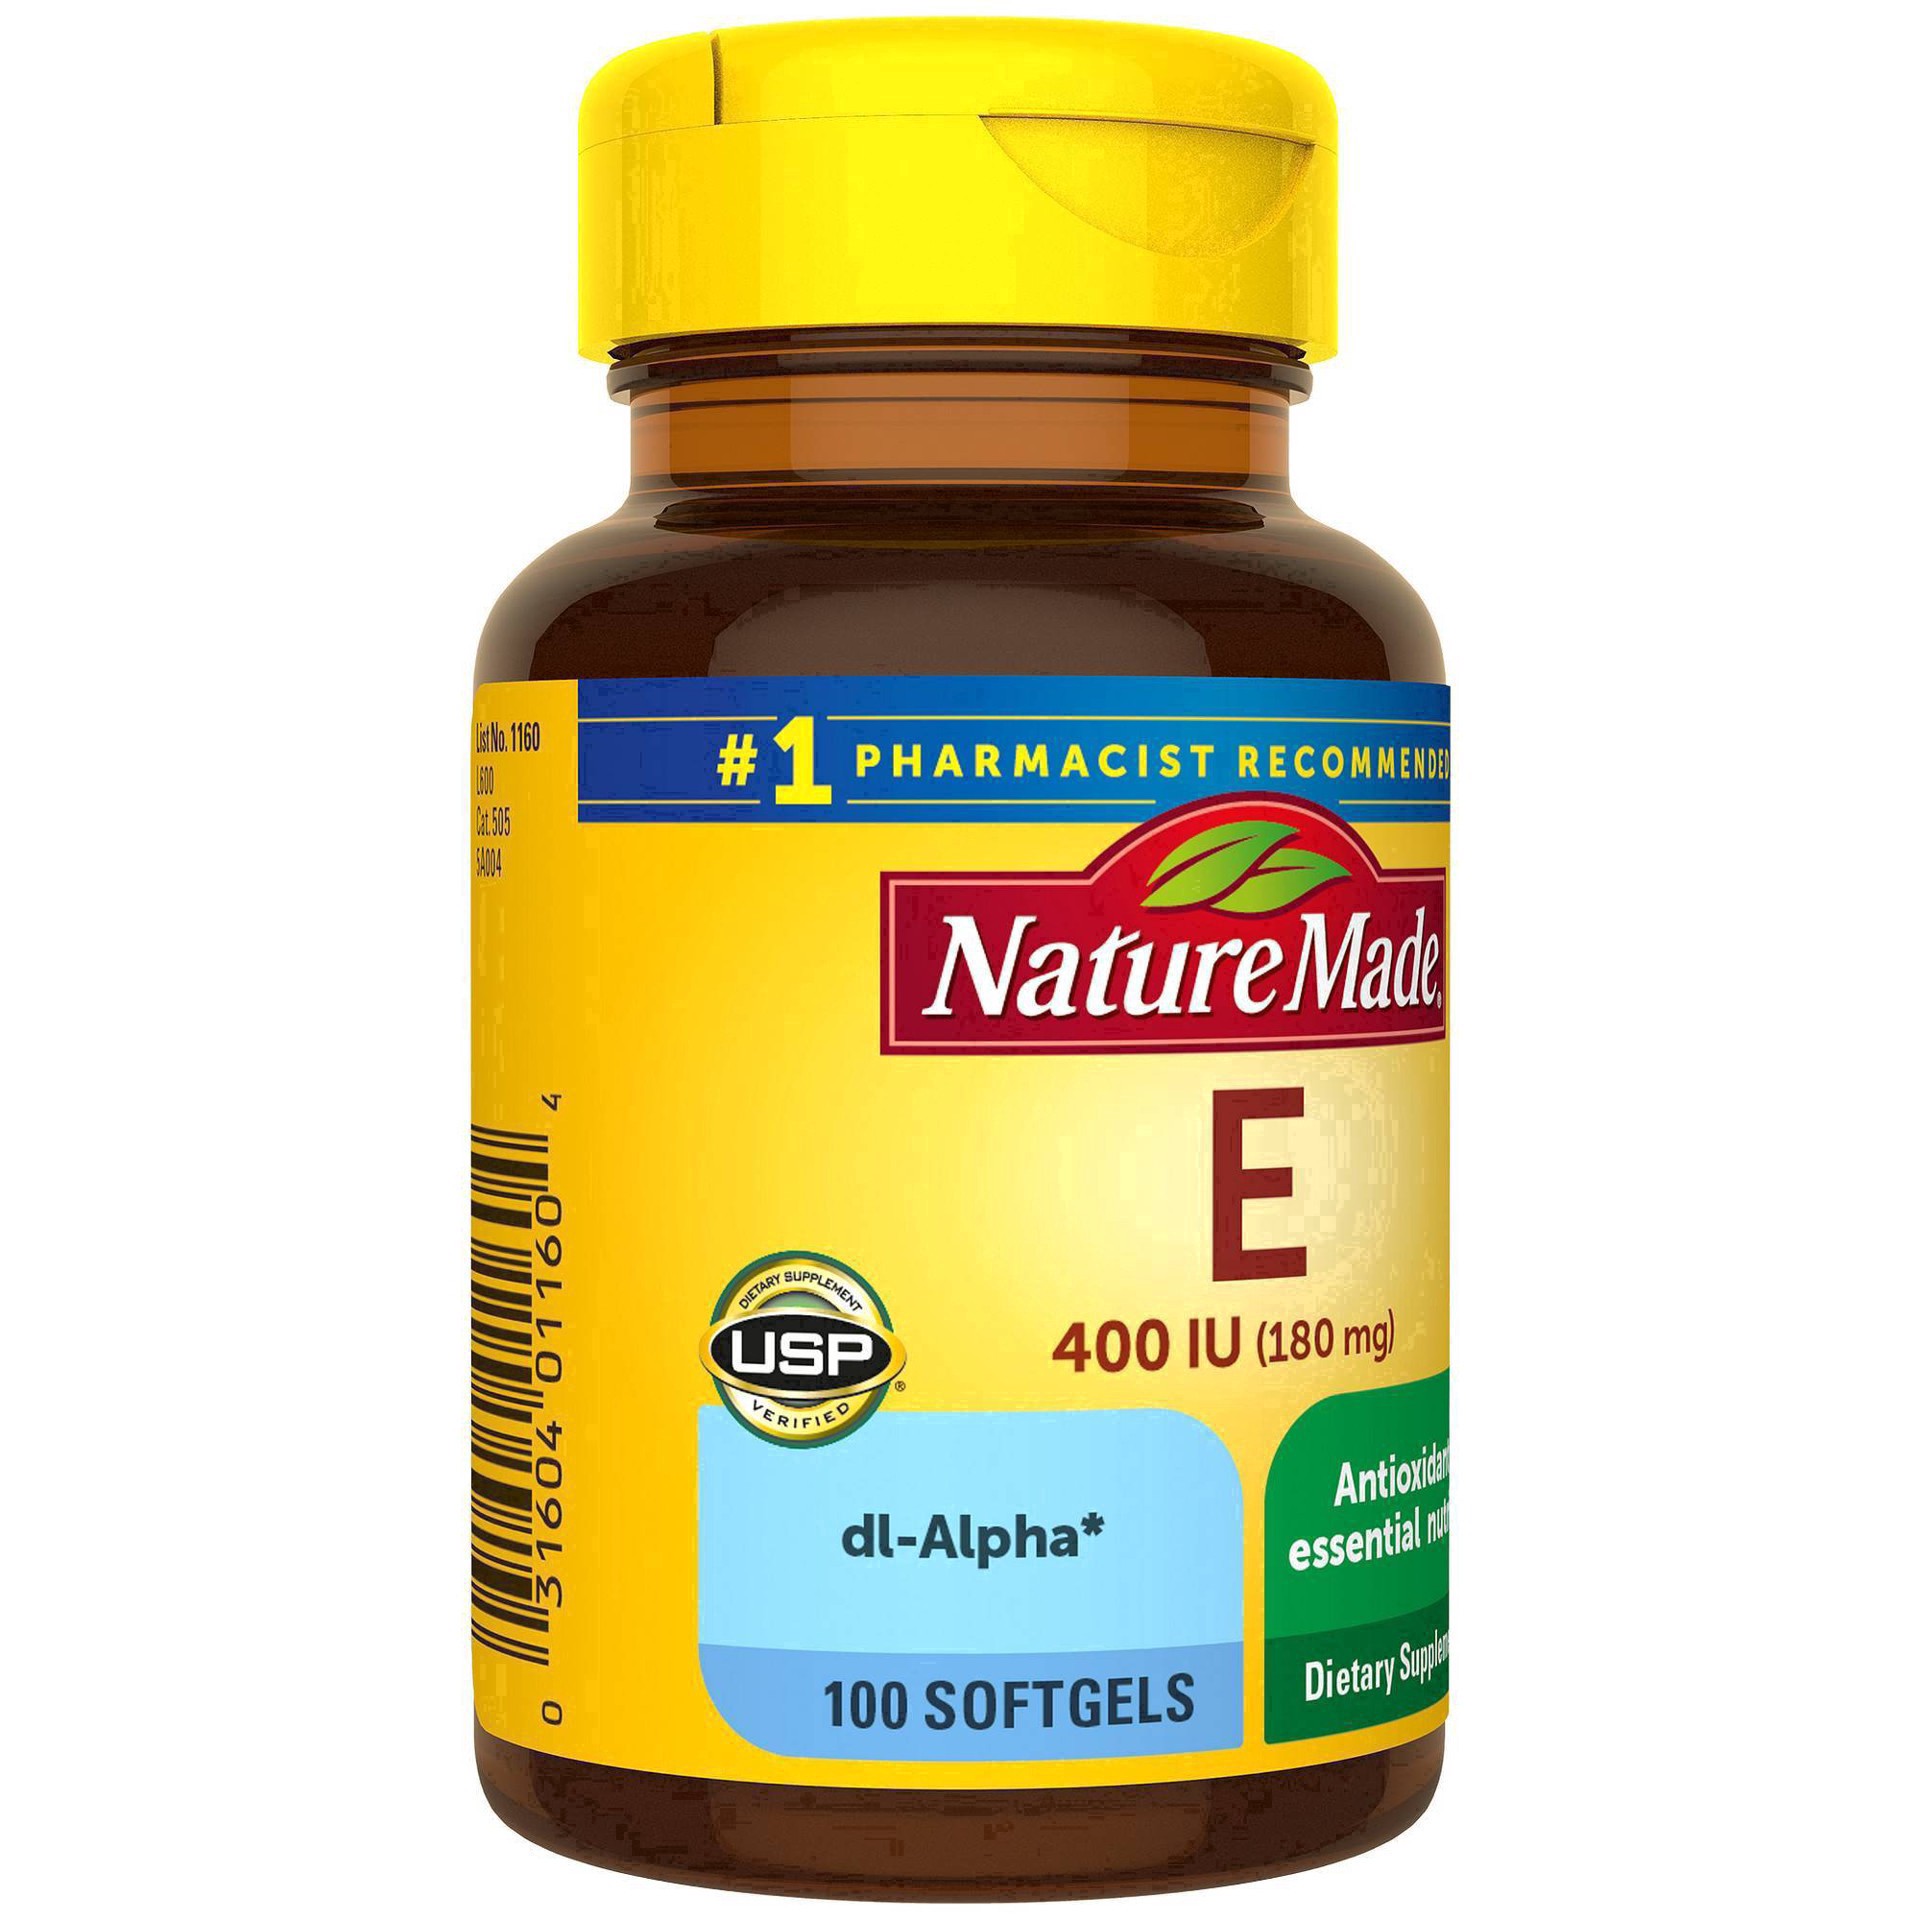 slide 42 of 74, Nature Made Vitamin E 180 mg (400 IU) dl-Alpha, Dietary Supplement for Antioxidant Support, 100 Softgels, 100 Day Supply, 100 ct